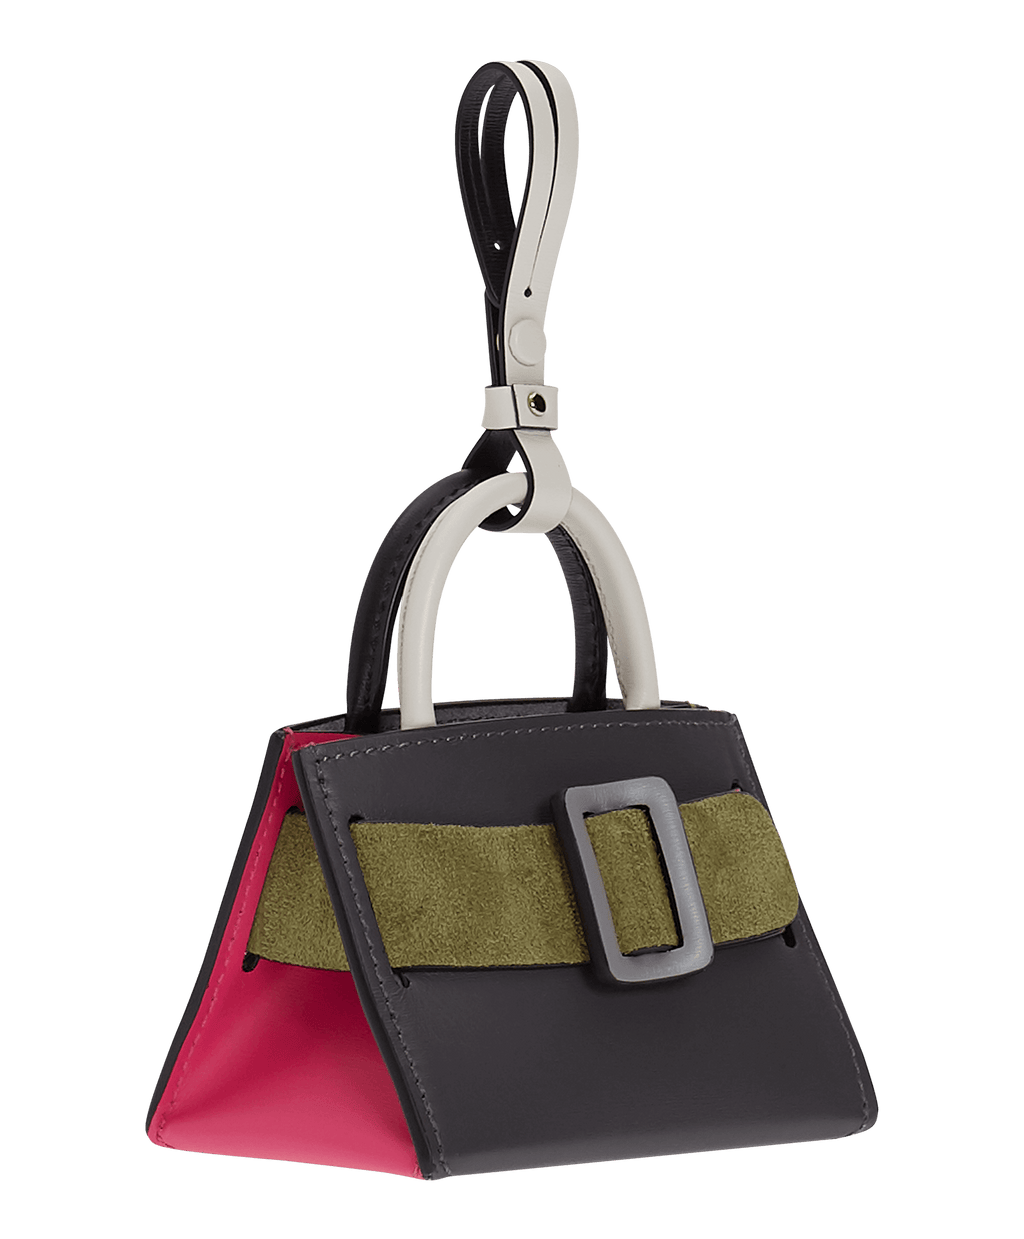 Miniature structured handbag charm with a leather buckle on the front, carry strap, and twin handles. Made with smooth calfskin leather.